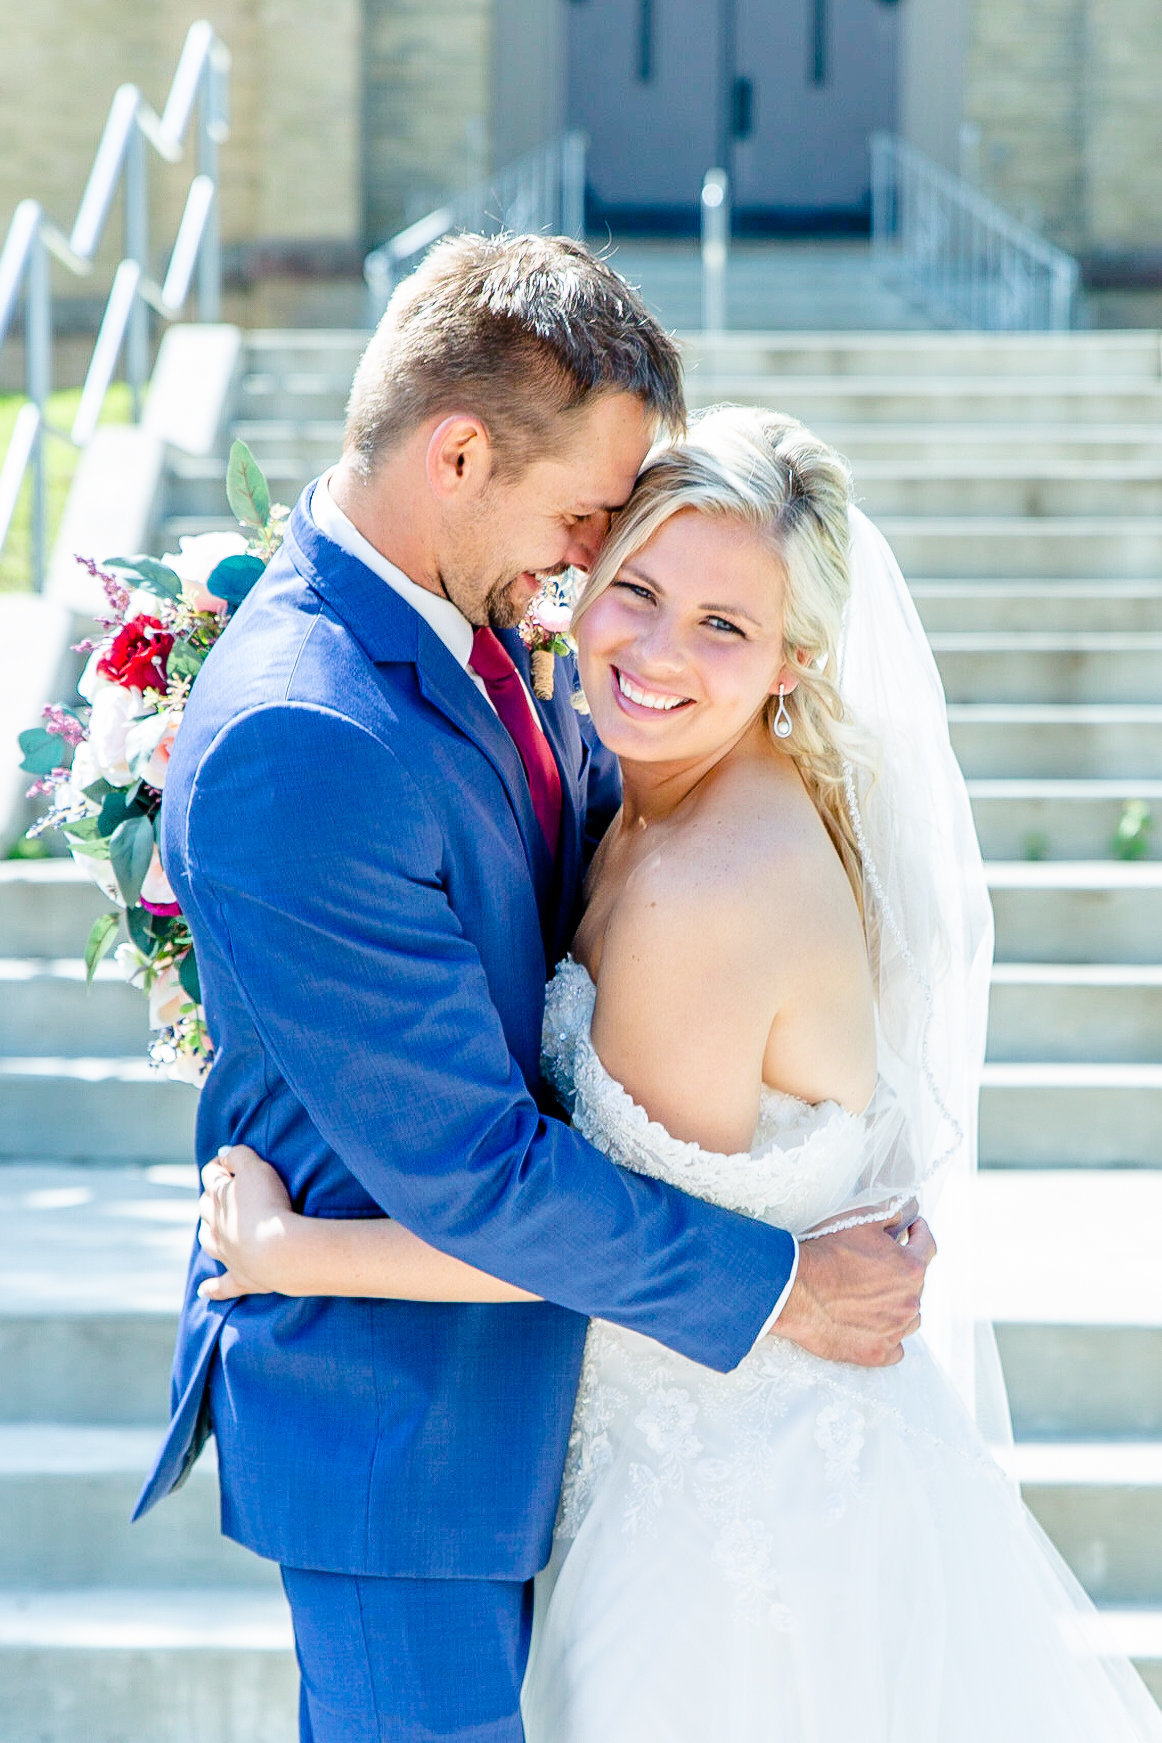 Bride and groom share moment of excitement before wedding